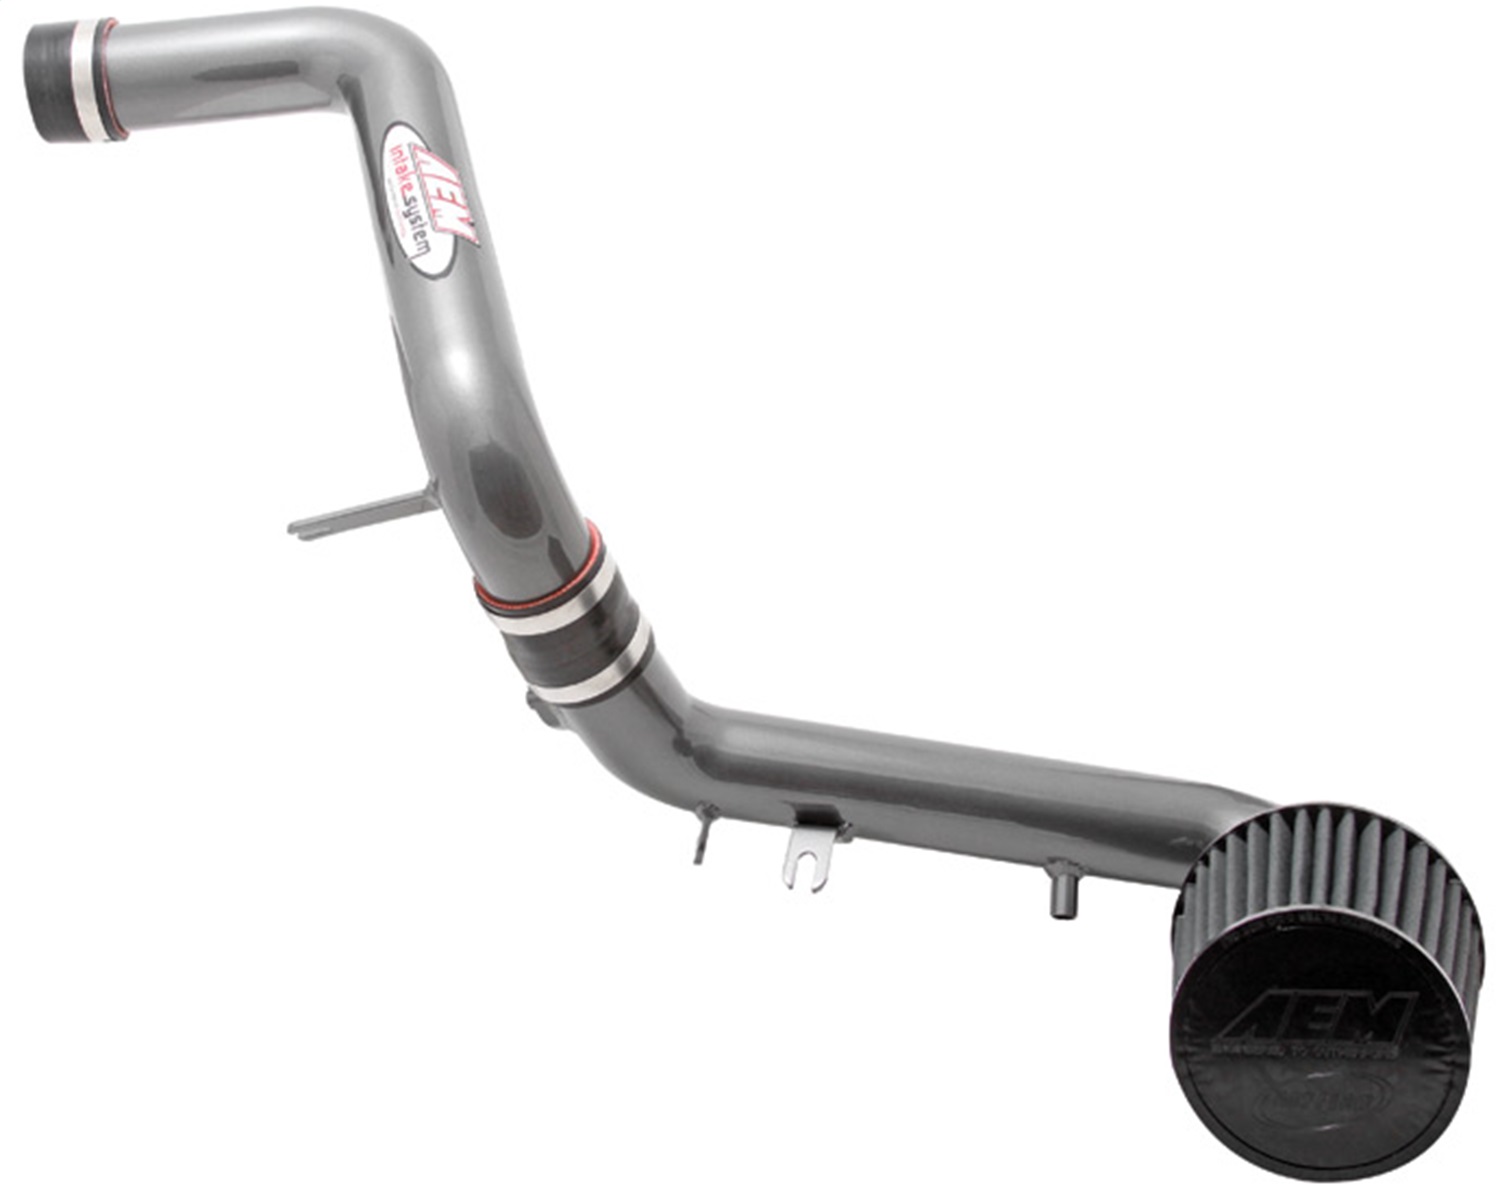 AEM Induction AEM Induction 21-686C Cold Air Induction System Fits 06-11 Civic